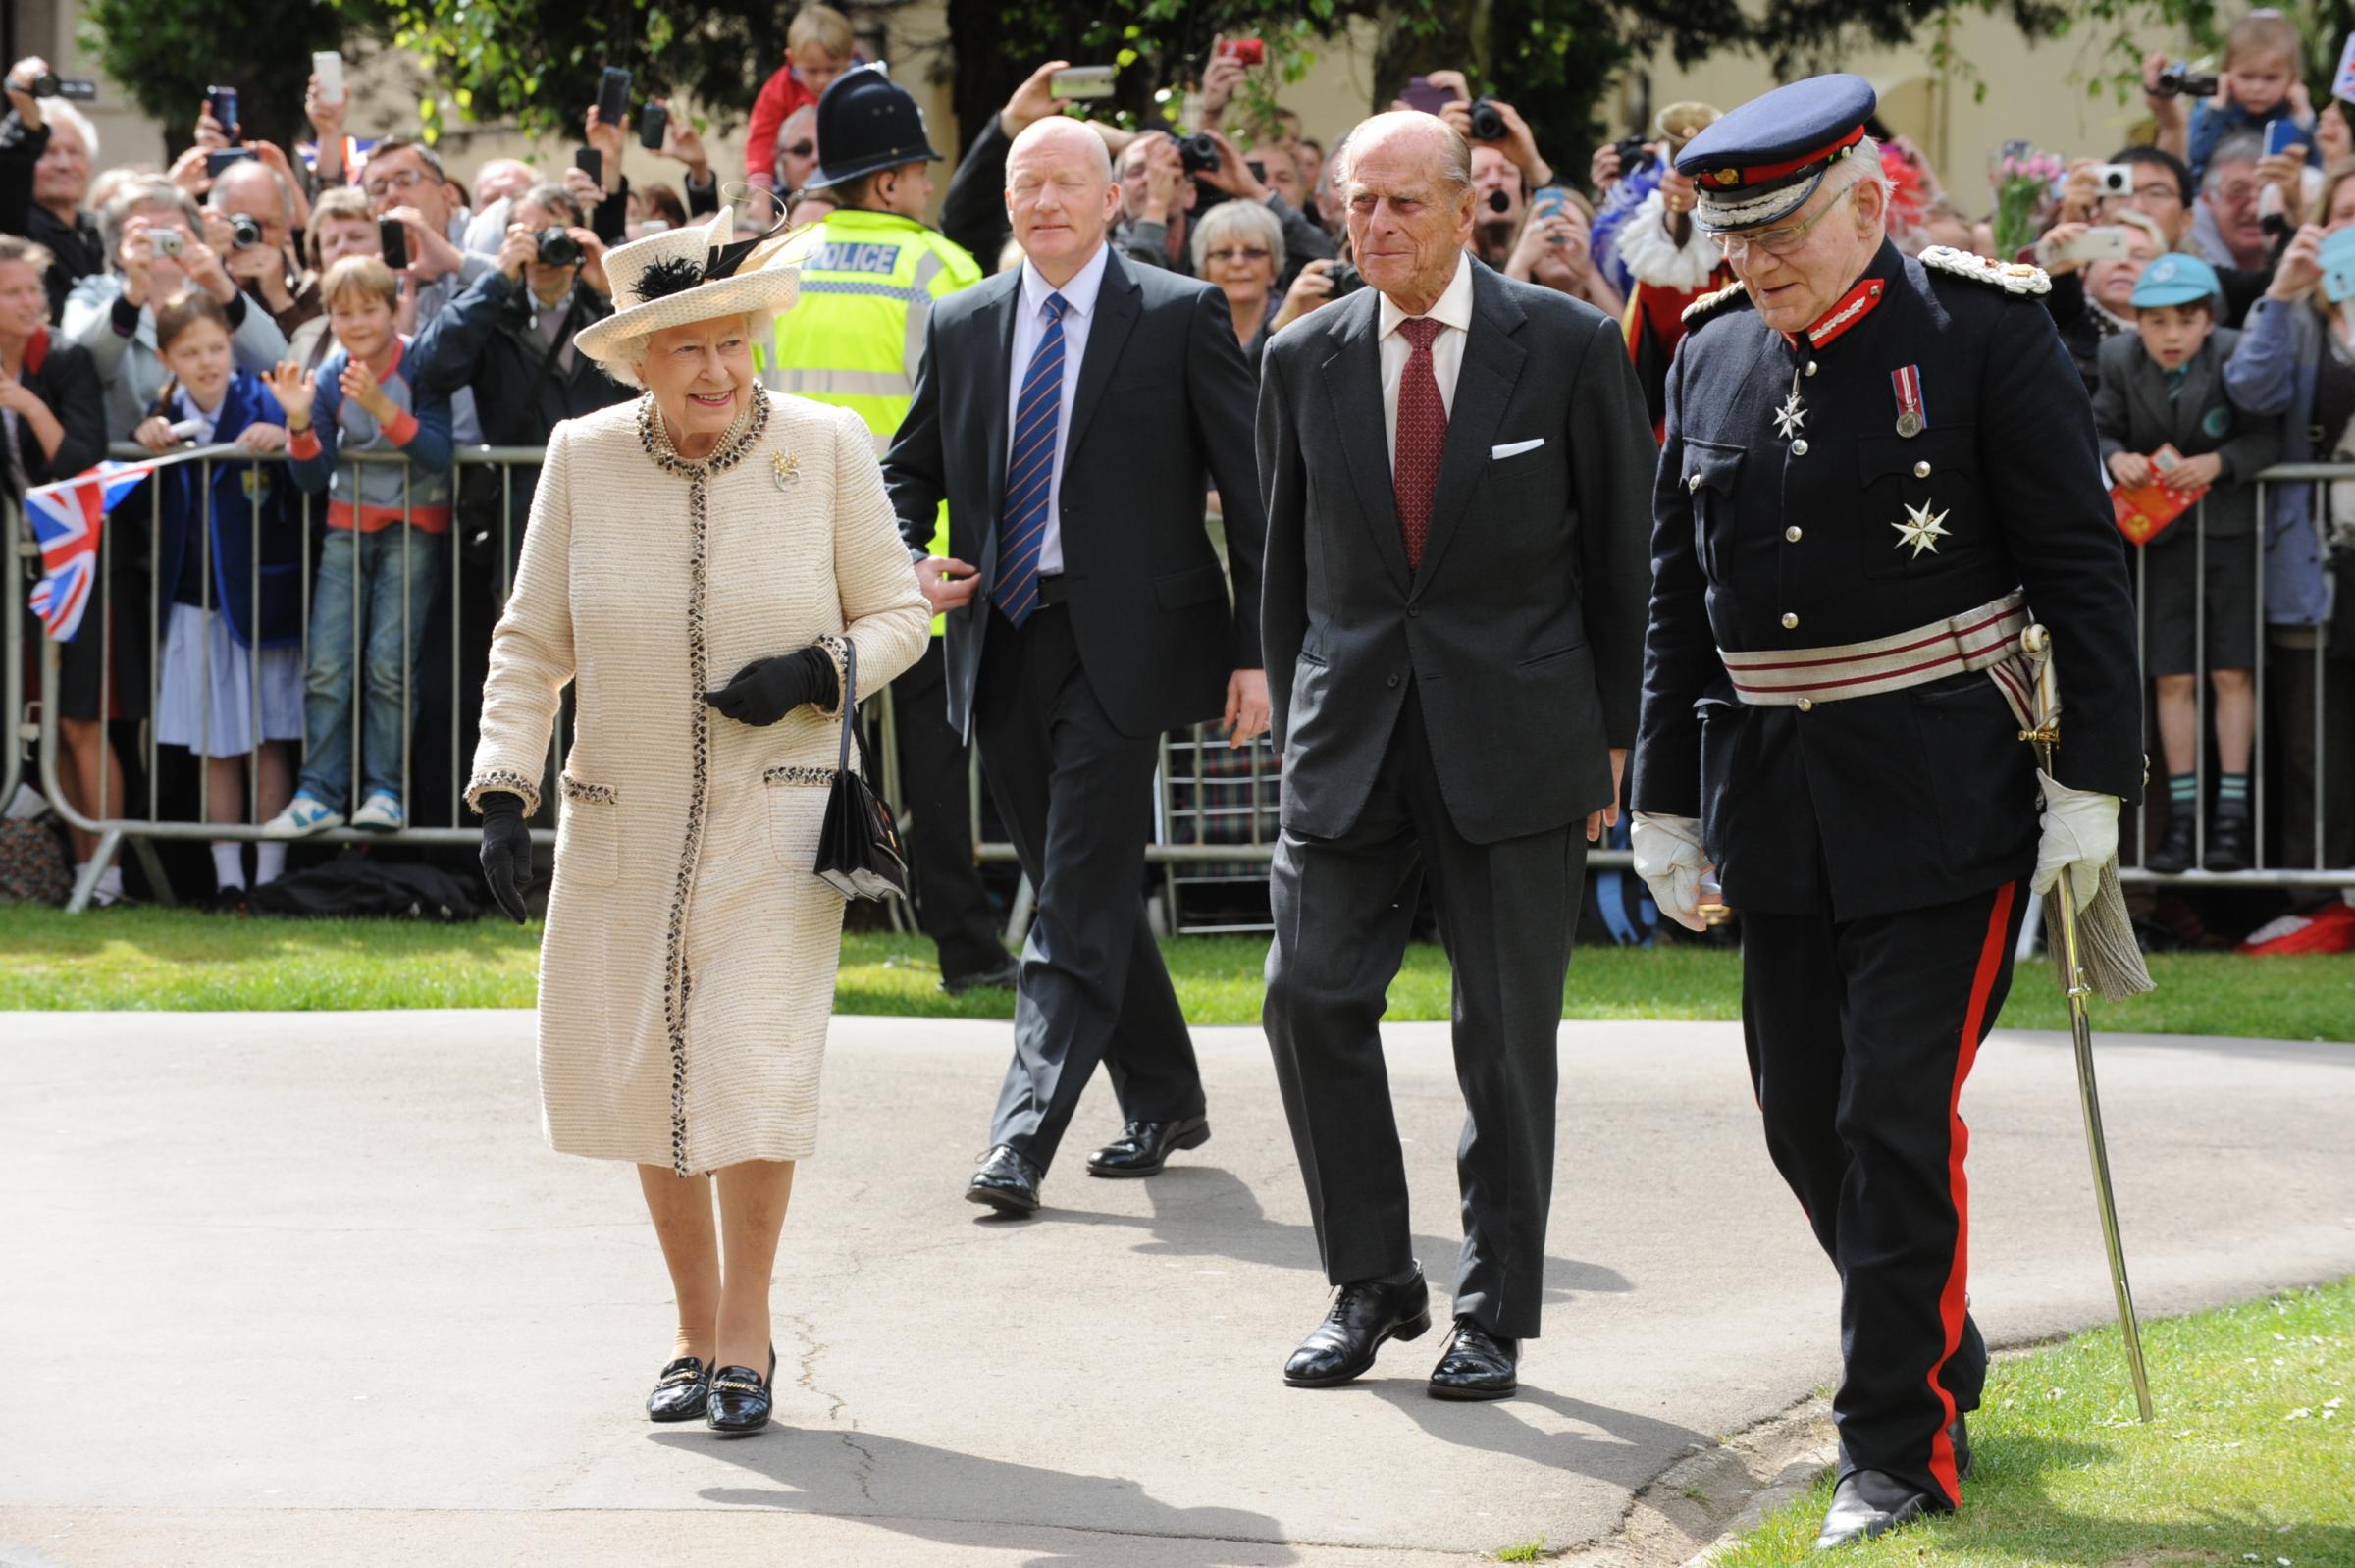 06/05/2014 PIC BY MAXINE CLARKE.The Queen and The Duke of Edinburgh will attend a Service at Chelmsford Cathedral, to celebrate centenary of the Diocese. PIC-.